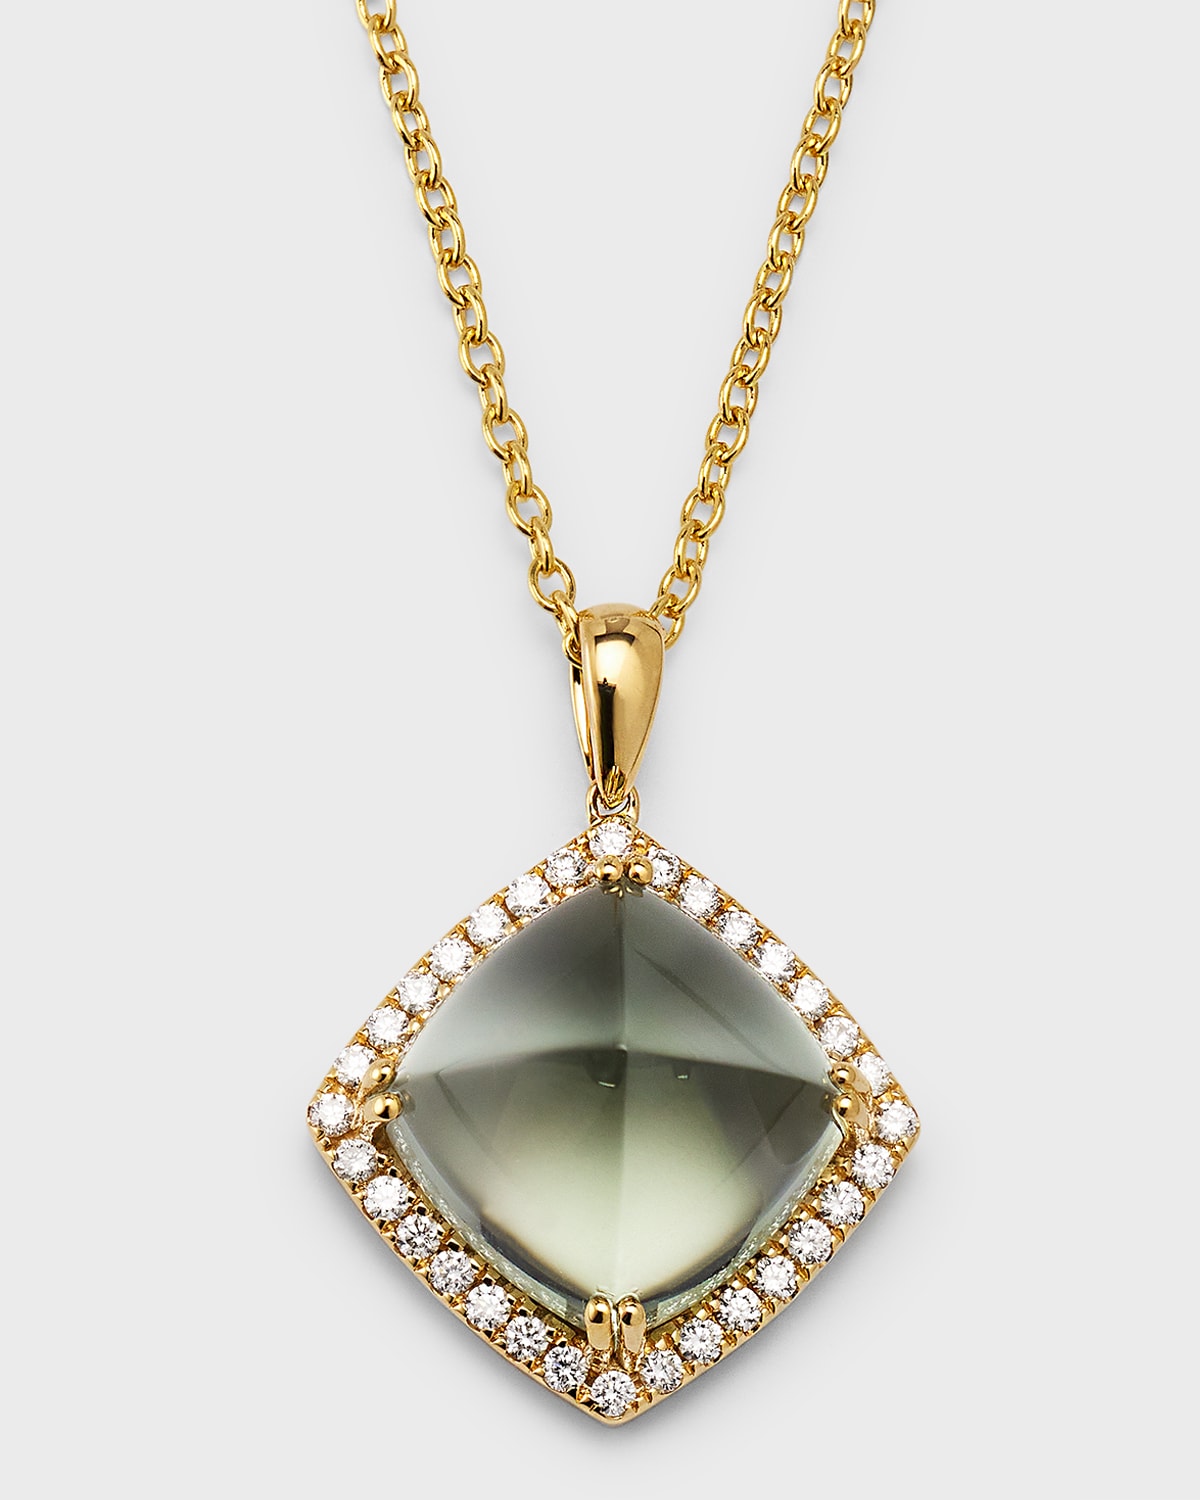 18K Yellow Gold Pendant with Green Amethyst and Diamonds, 8.58tcw